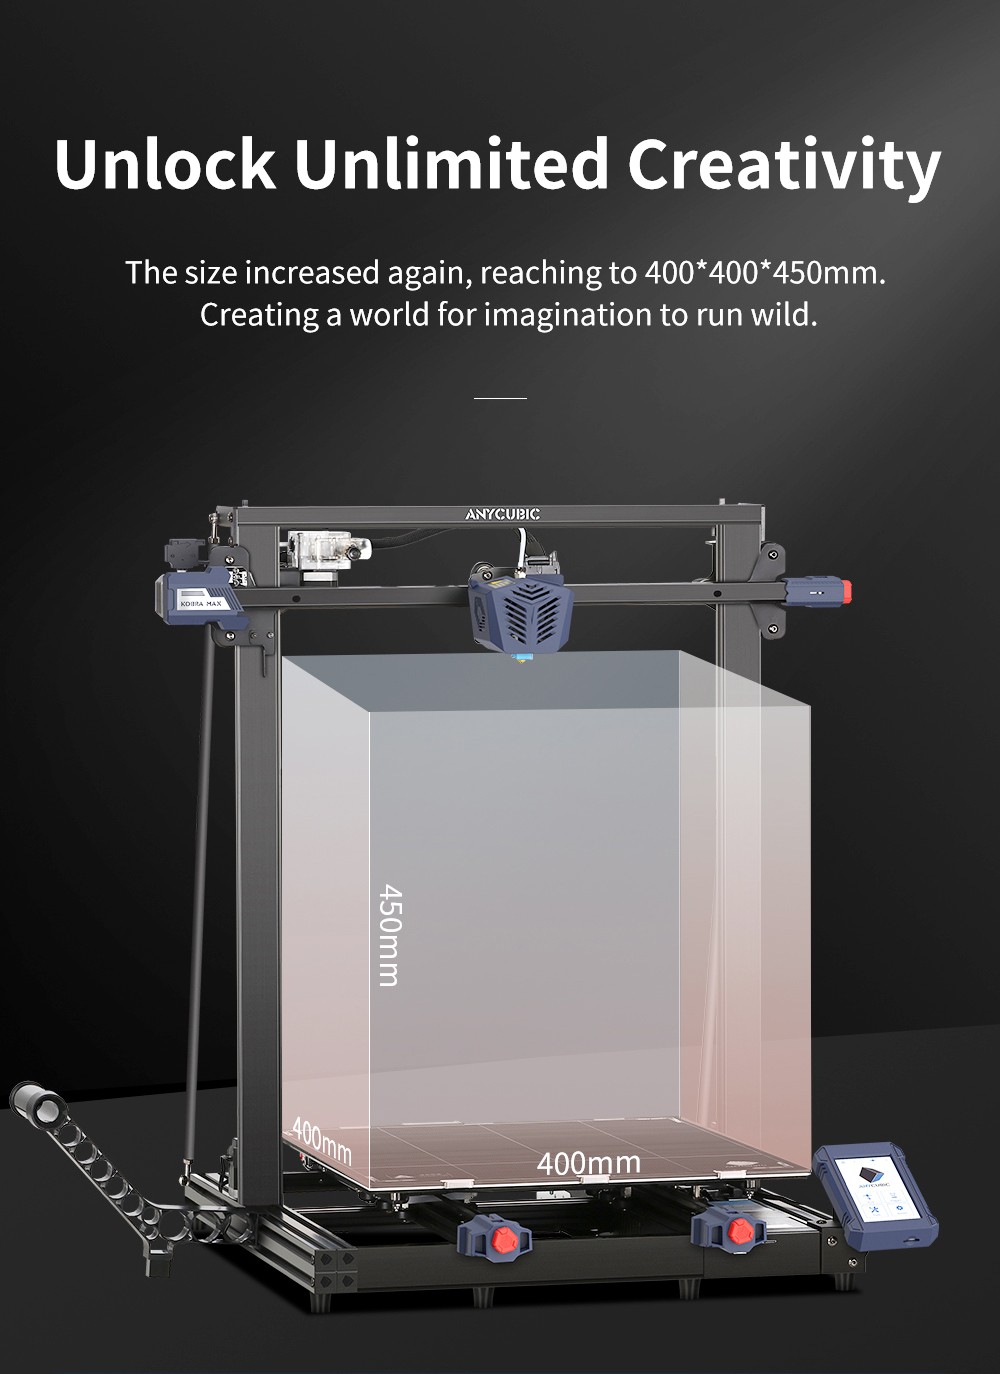 Anycubic Kobra Max 3D Printer, Auto Leveling, Stepper Drivers, 4.3 inch Display, Printing Size 450x400x400mm